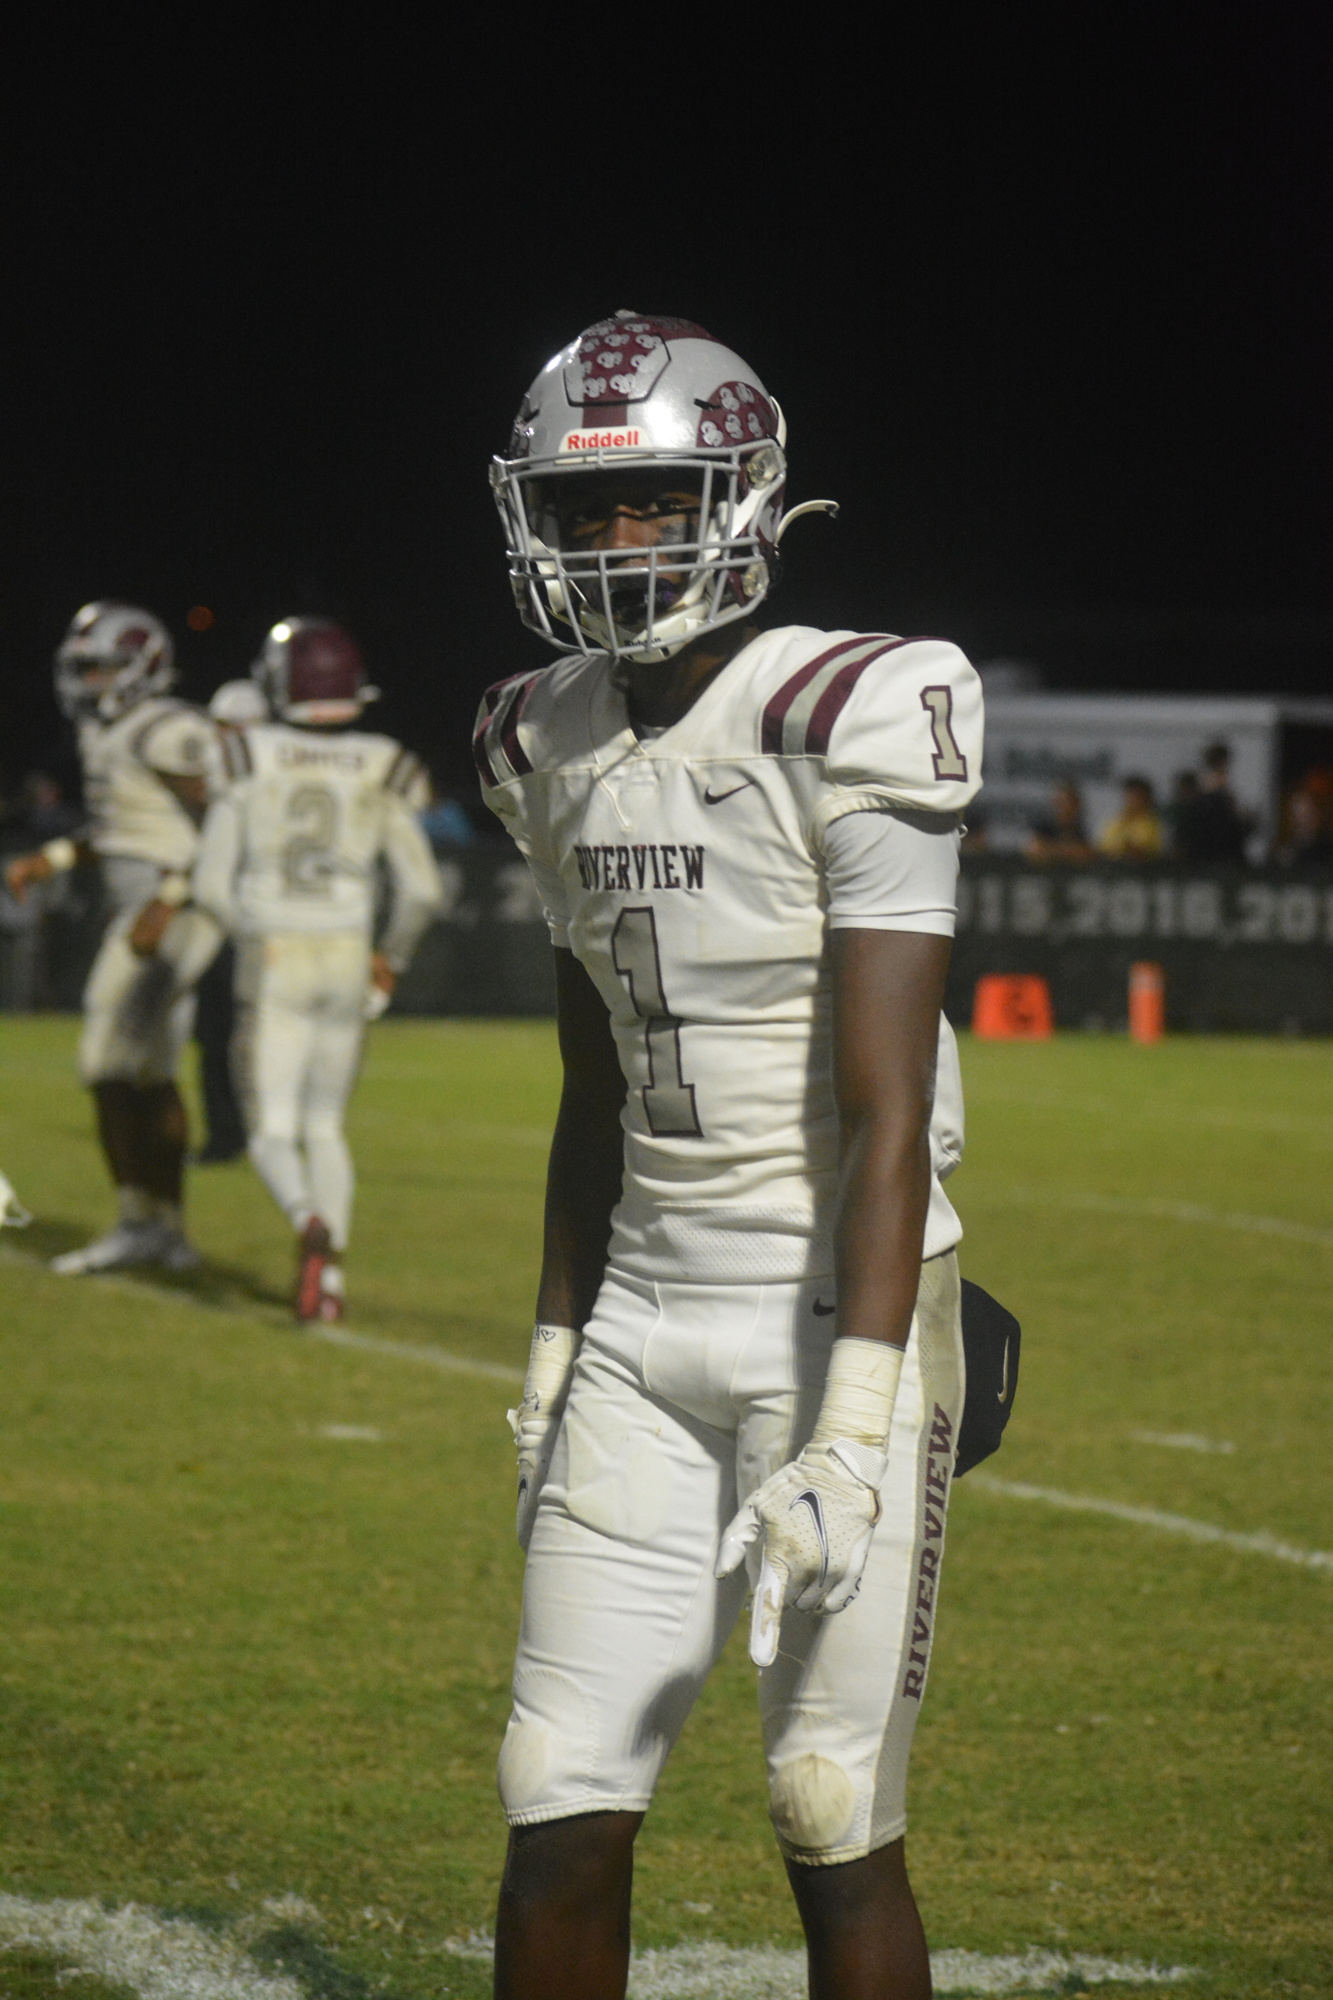 2. Charles Lester III excelled at defensive back and wide receiver for Riverview.